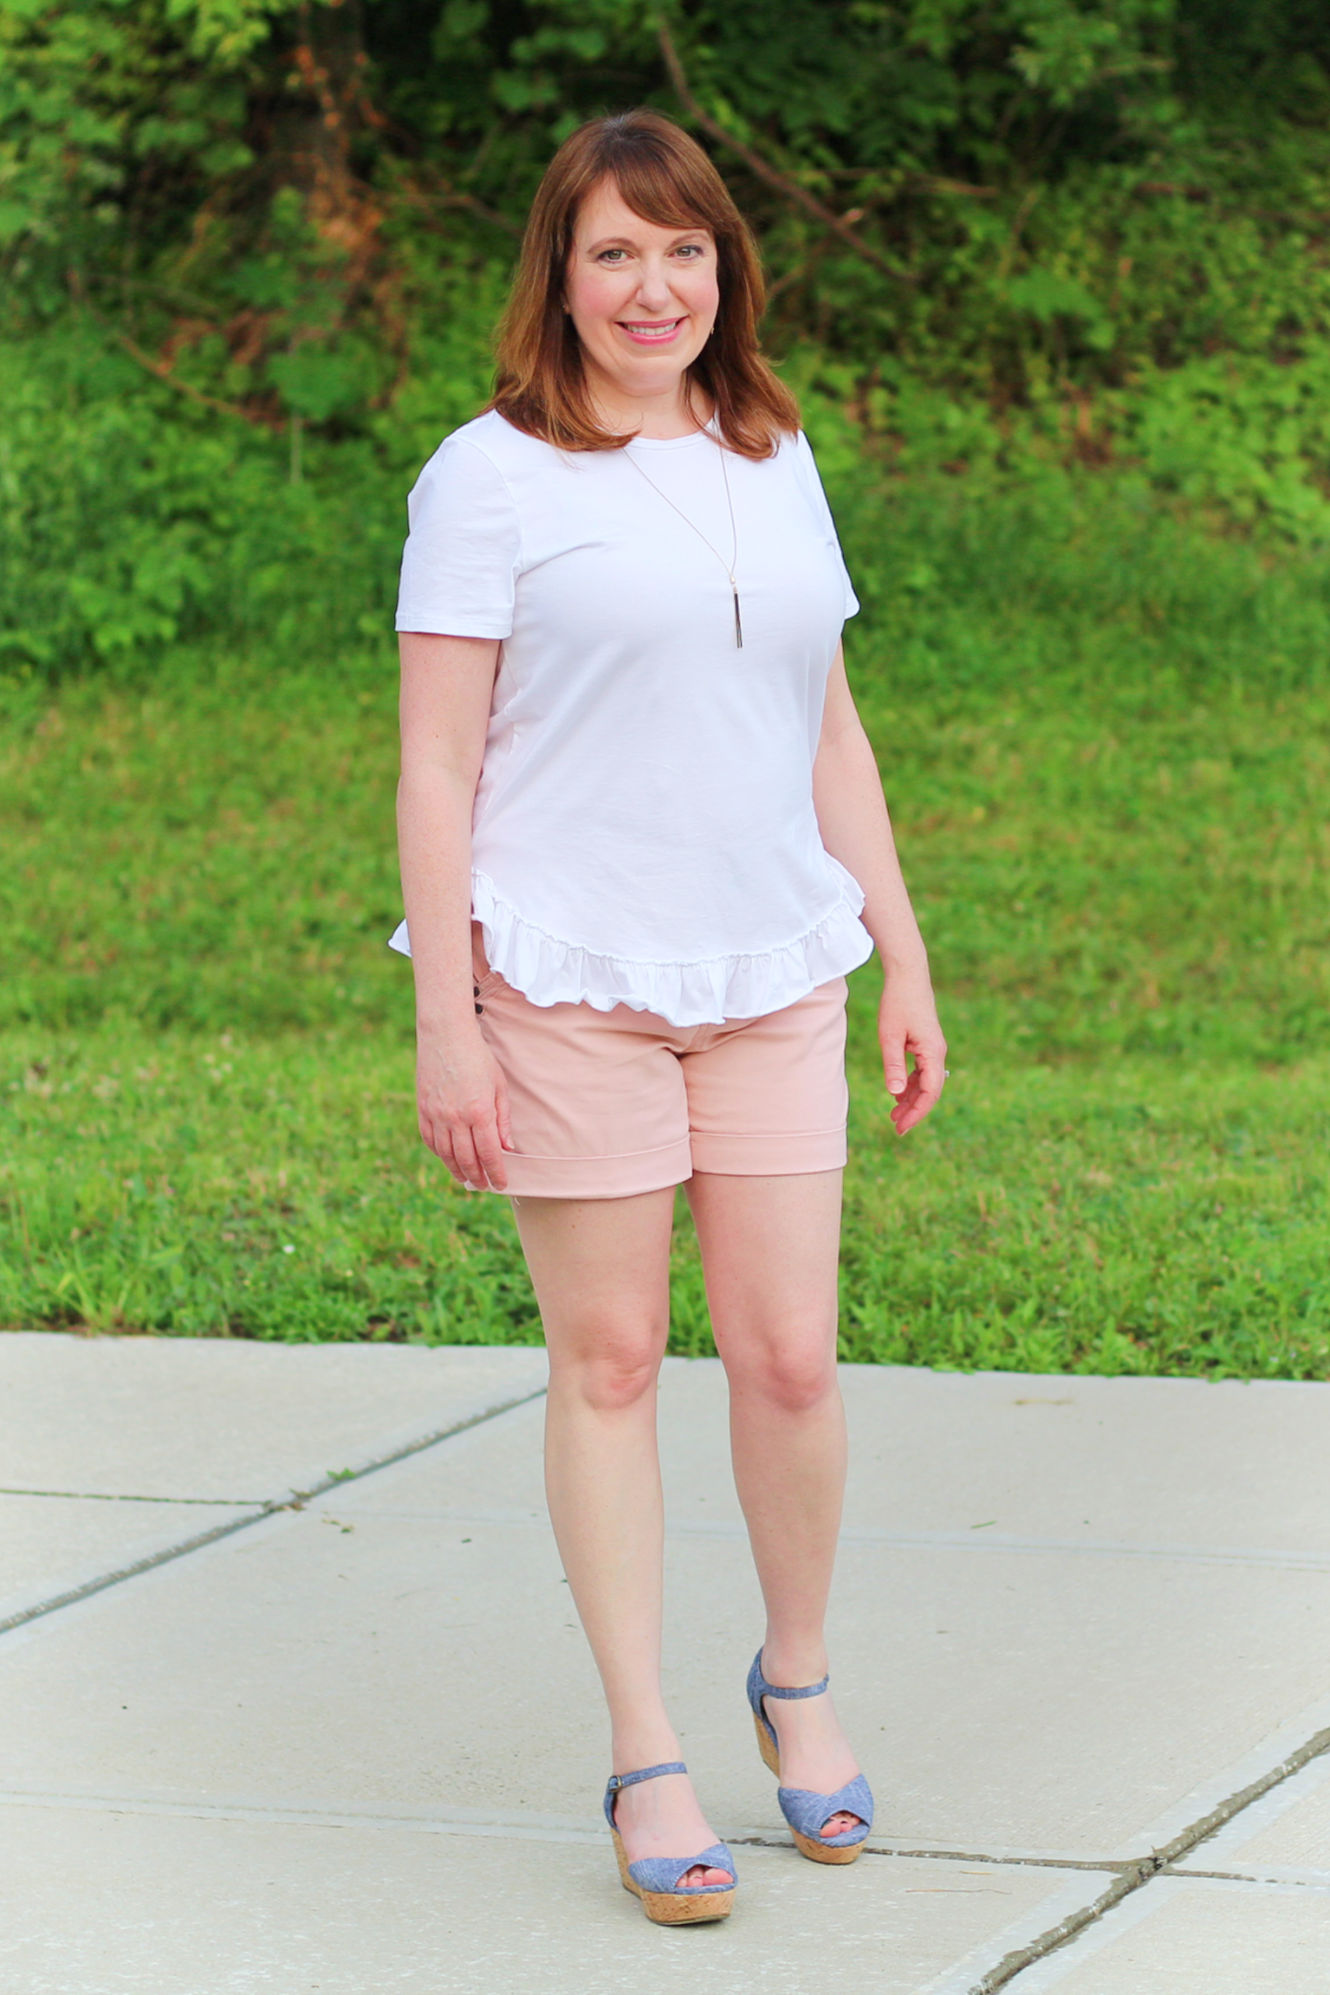 White Peplum Top And Blush Shorts #summeroutfit #over40fashion